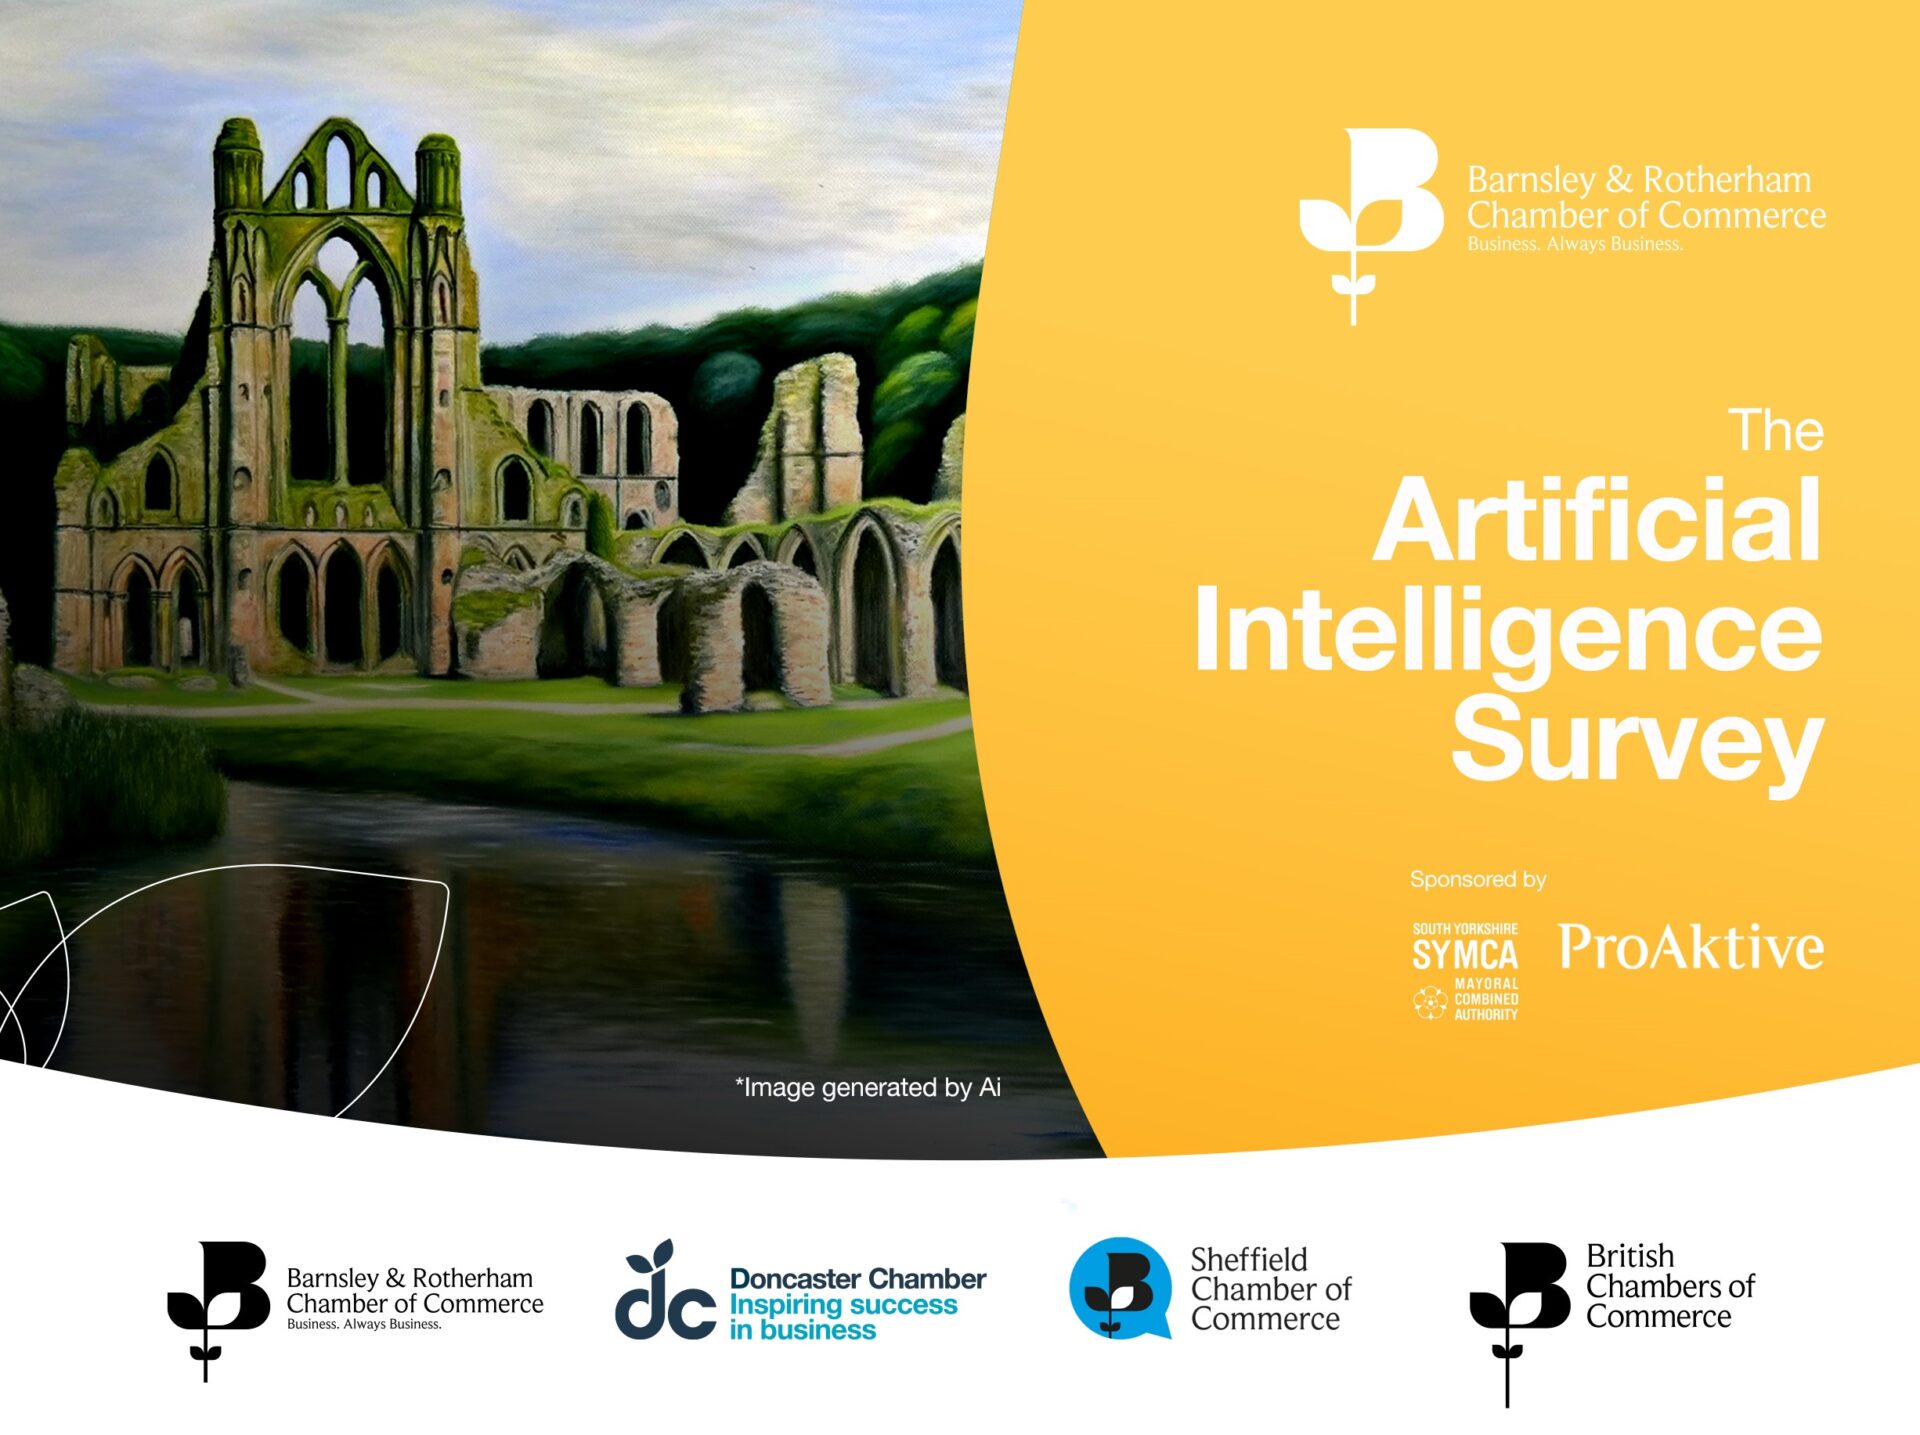 South Yorkshire Businesses Asked To Share Their Views on AI and How Well-Prepared They Are To Utilise It